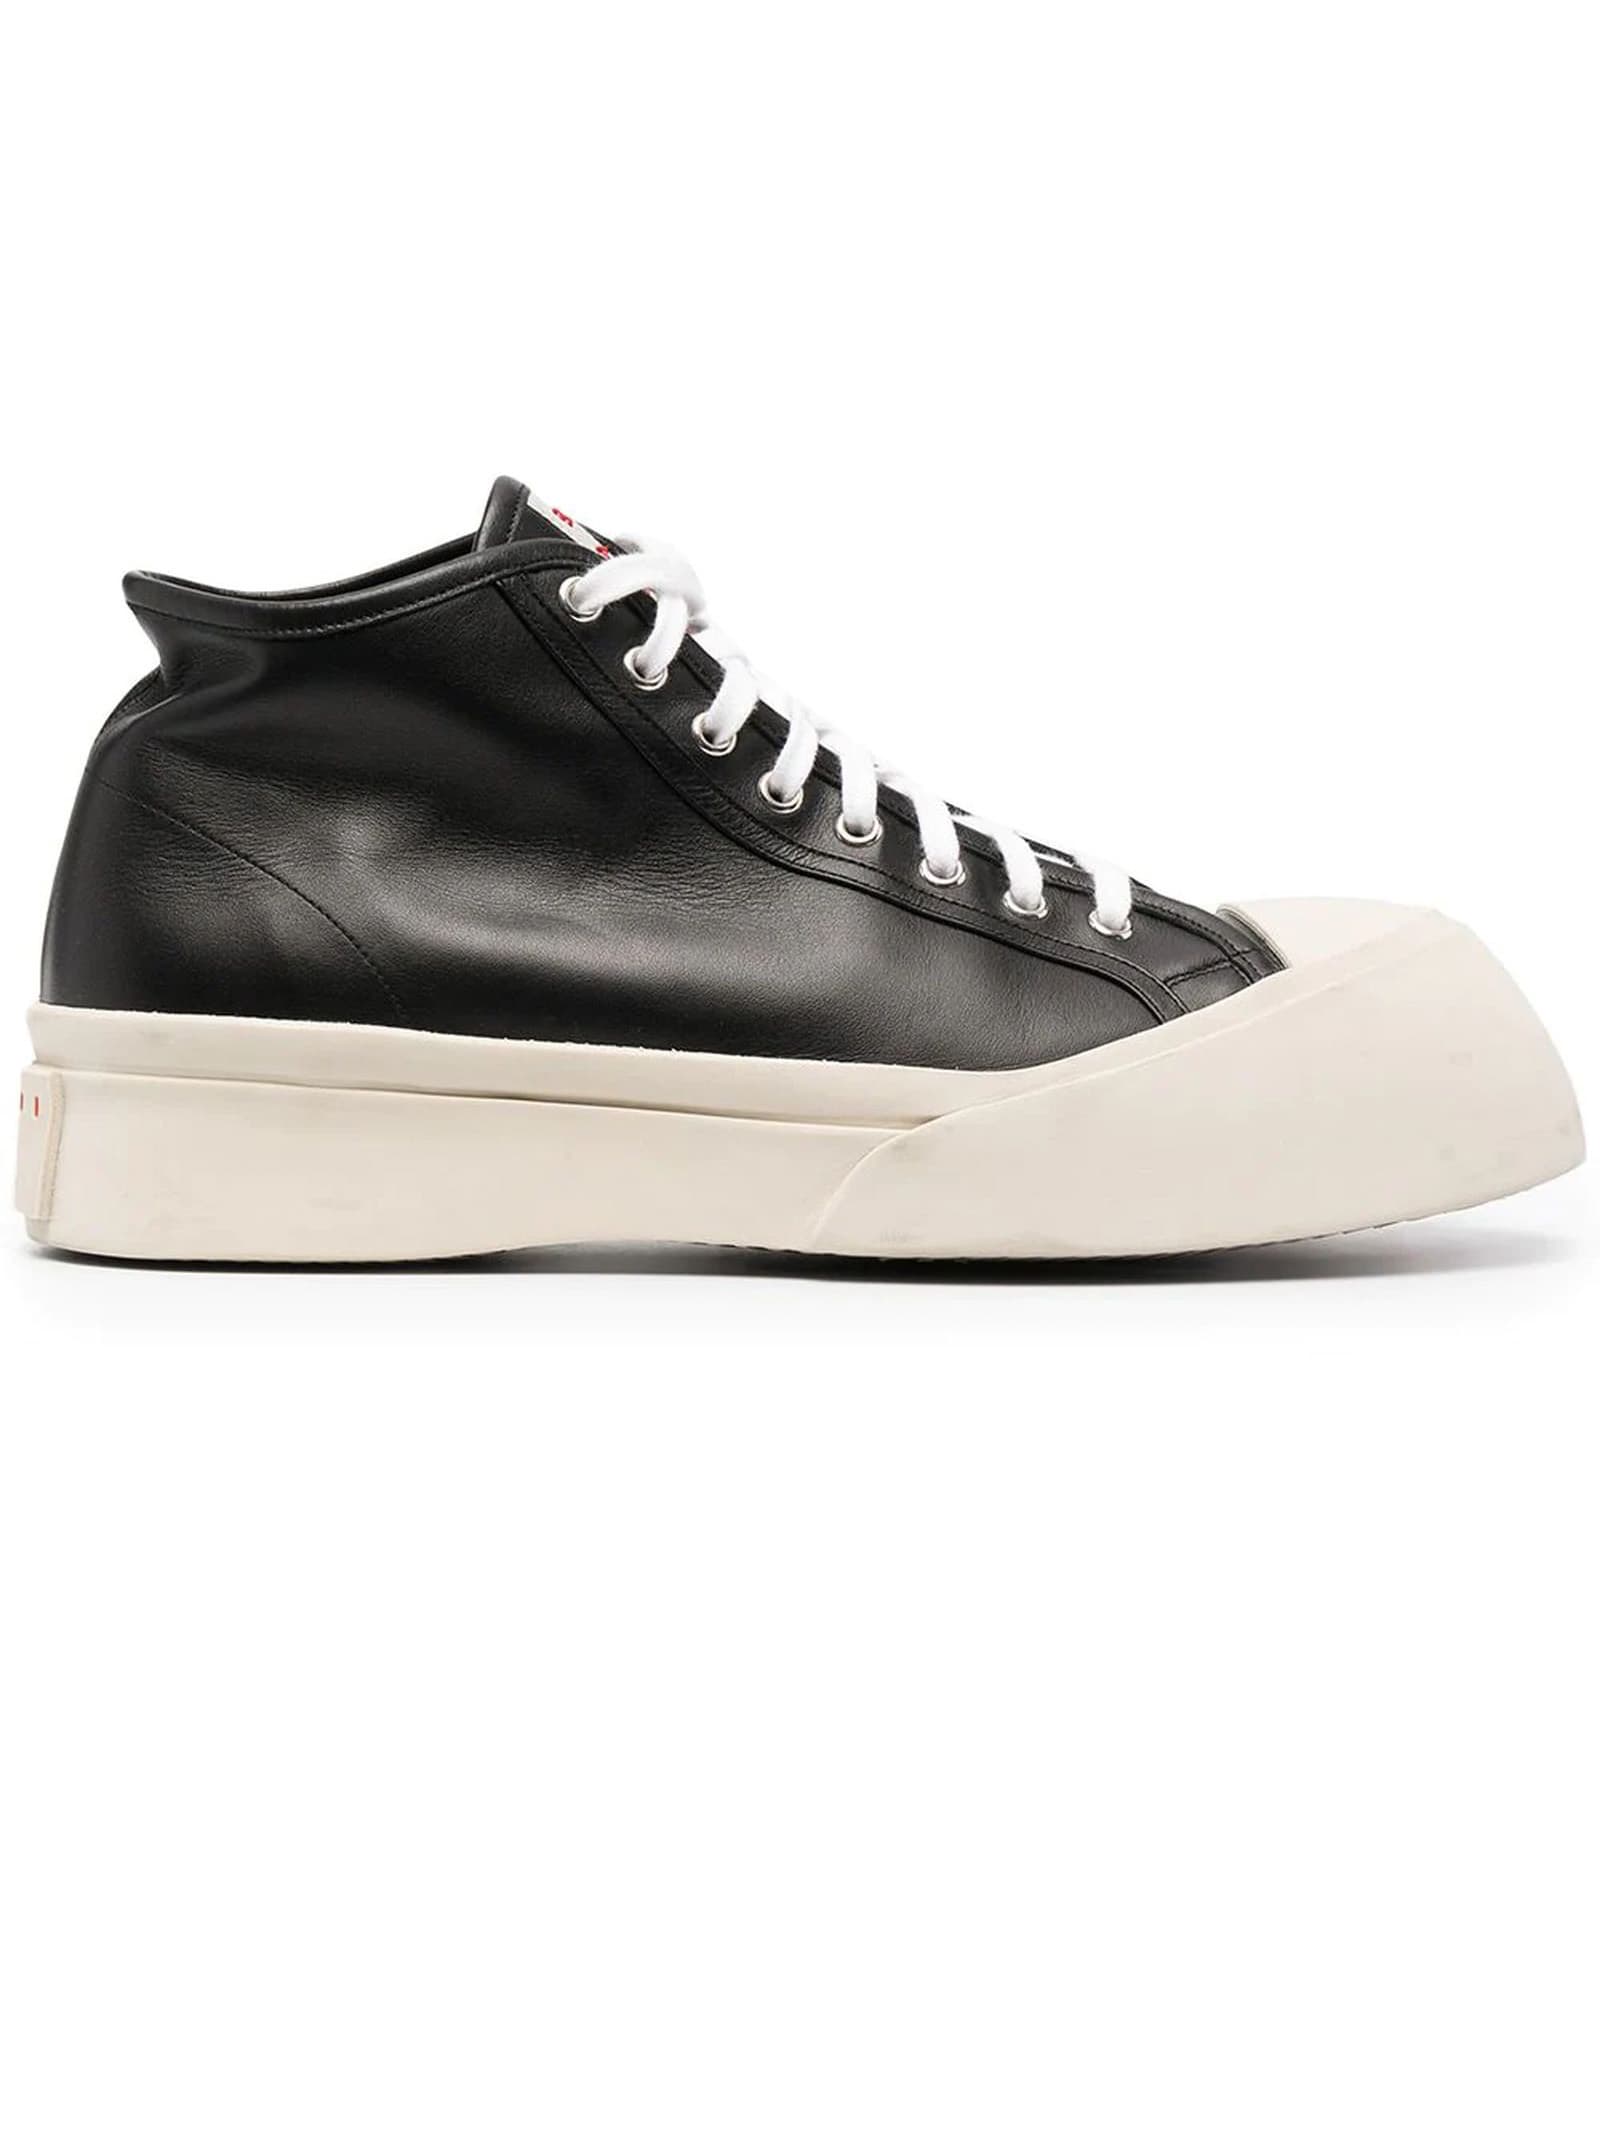 MARNI PABLO HIGH-TOP LACE-UP SNEAKER